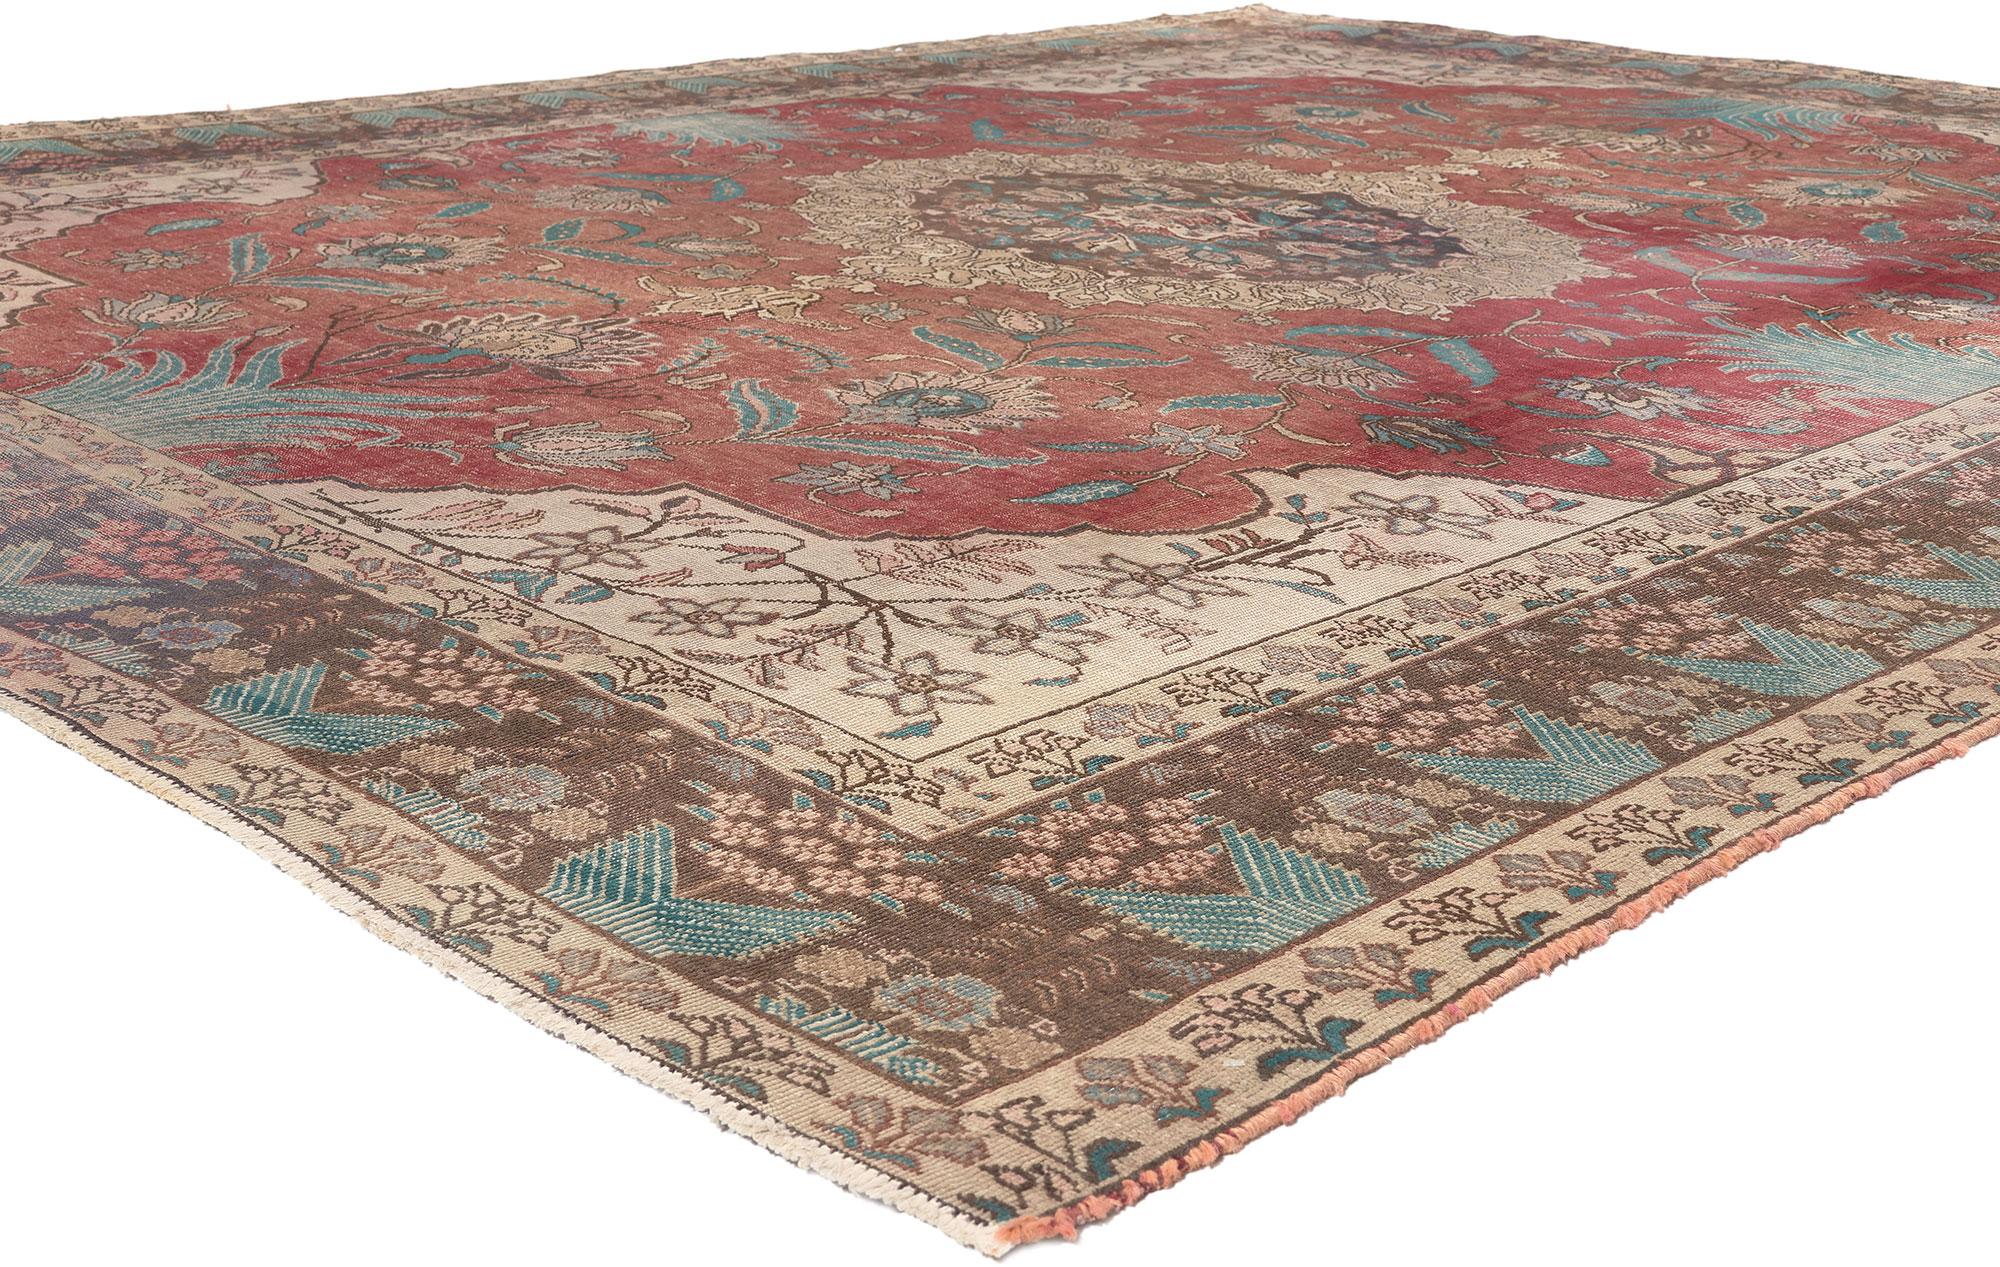 75544 Vintage Persian Tabriz Rug, 08'09 x 10'09. 
Craftsman style meets rustic elegance in this hand knotted wool vintage Persian Tabriz rug. The naturalistic forms and time-softened colors woven into this piece work together resulting in a relaxed